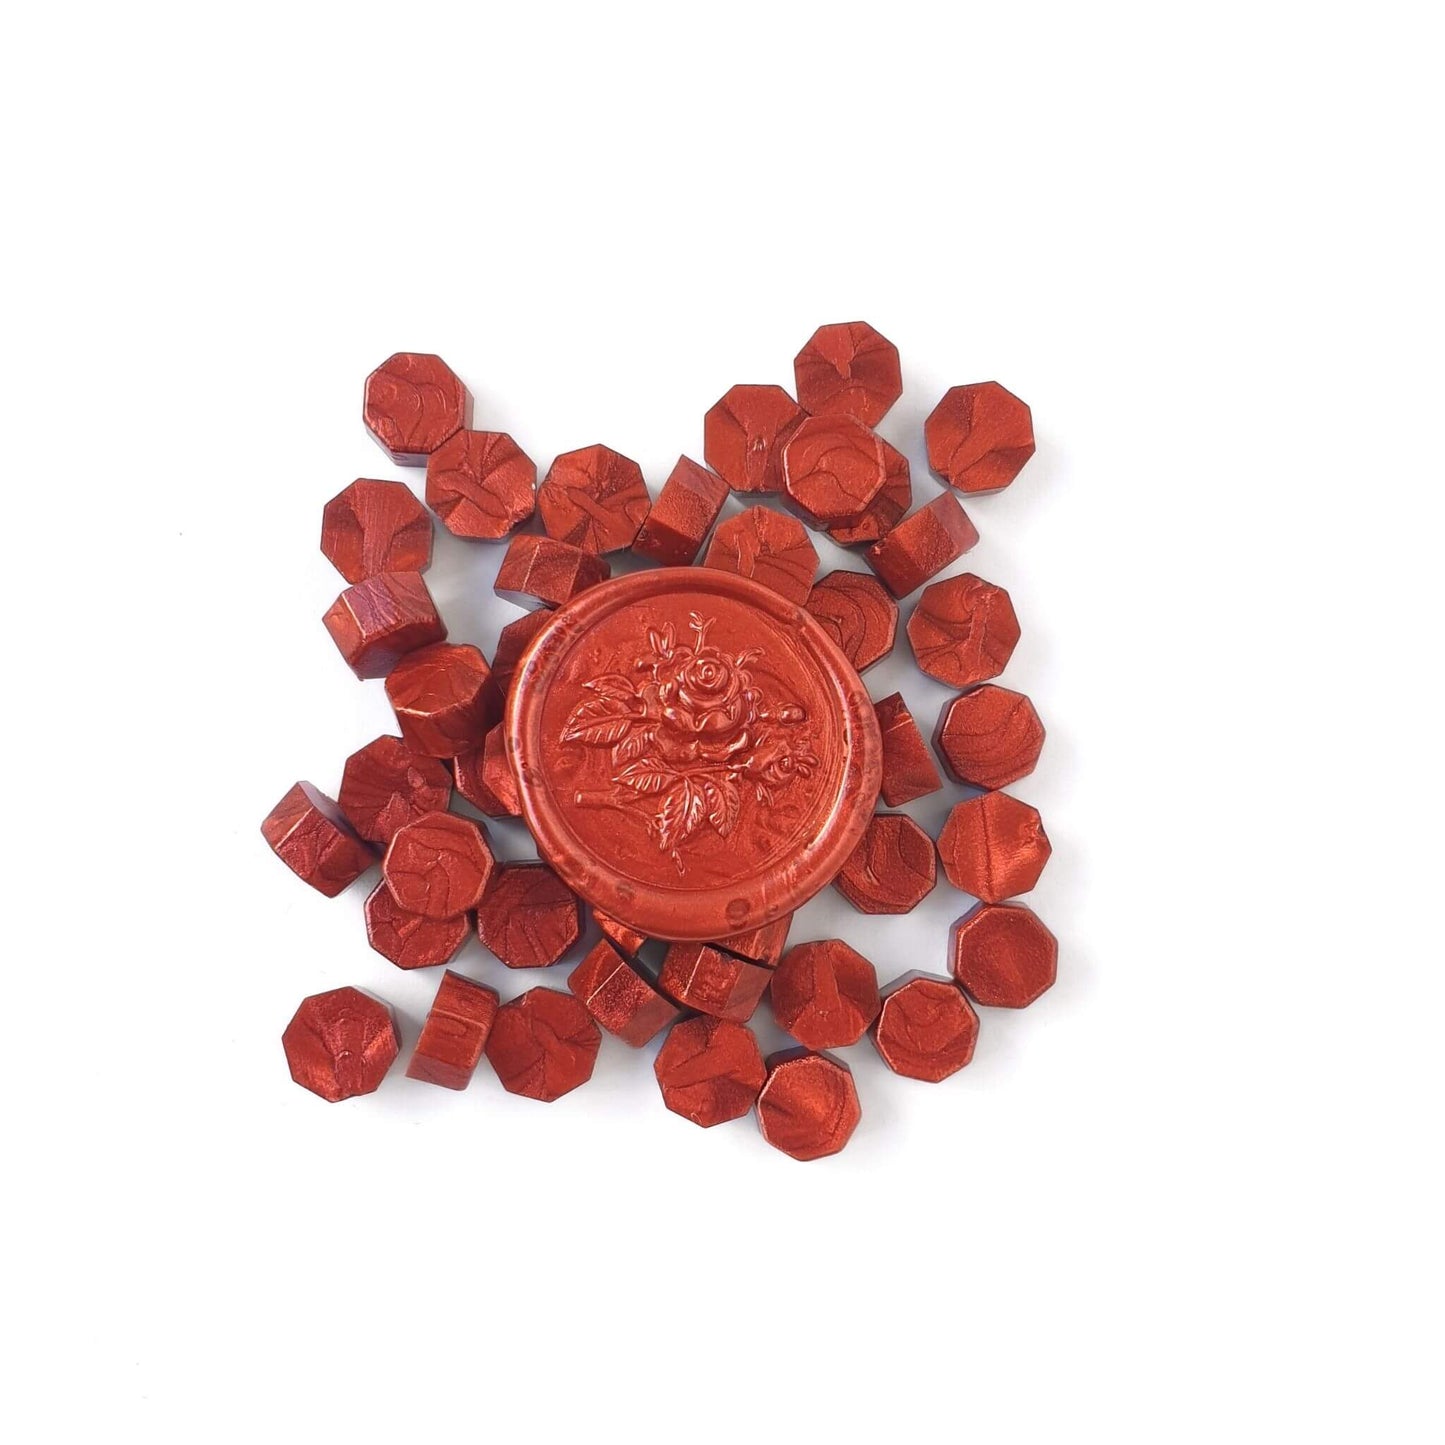 garnet red sealing wax beads with a red metallic wax seal in the middle